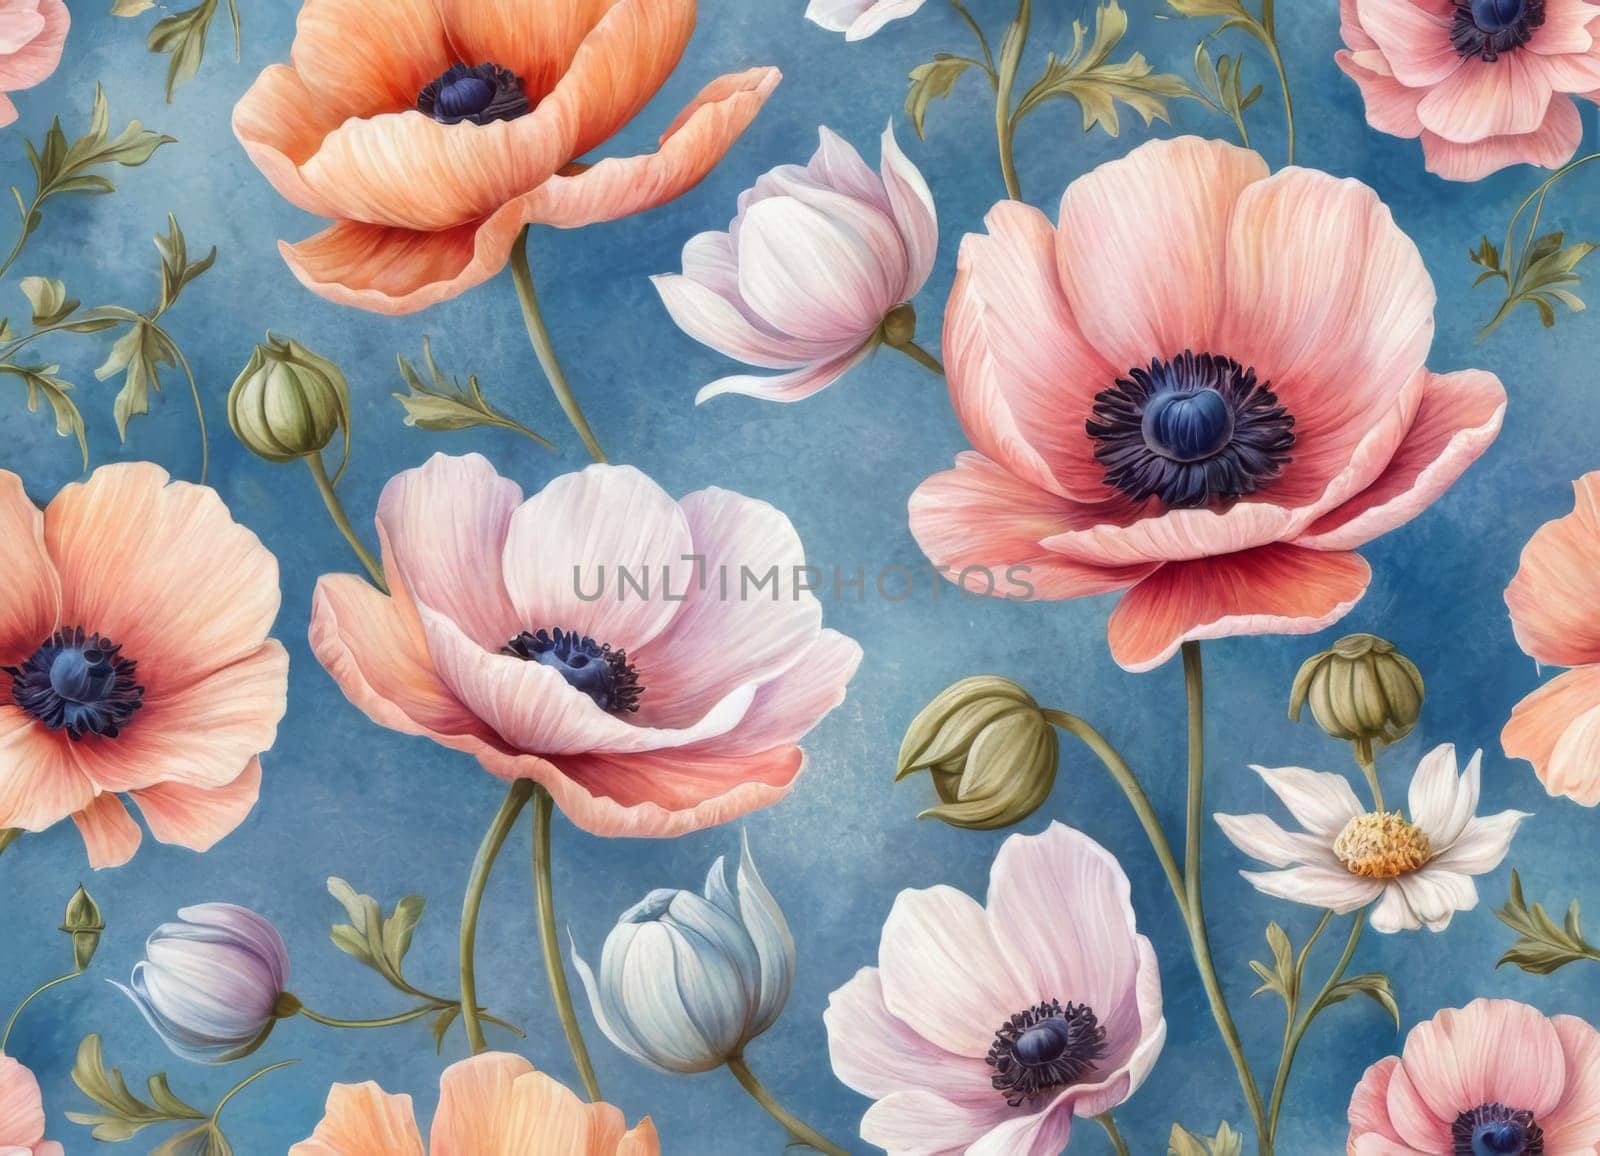 A captivating display of blooming anemones with delicate petals in soft hues against a tranquil blue backdrop. The image evokes a sense of ethereal beauty and serenity. Ideal for conveying themes of nature s elegance and spring s renewal.